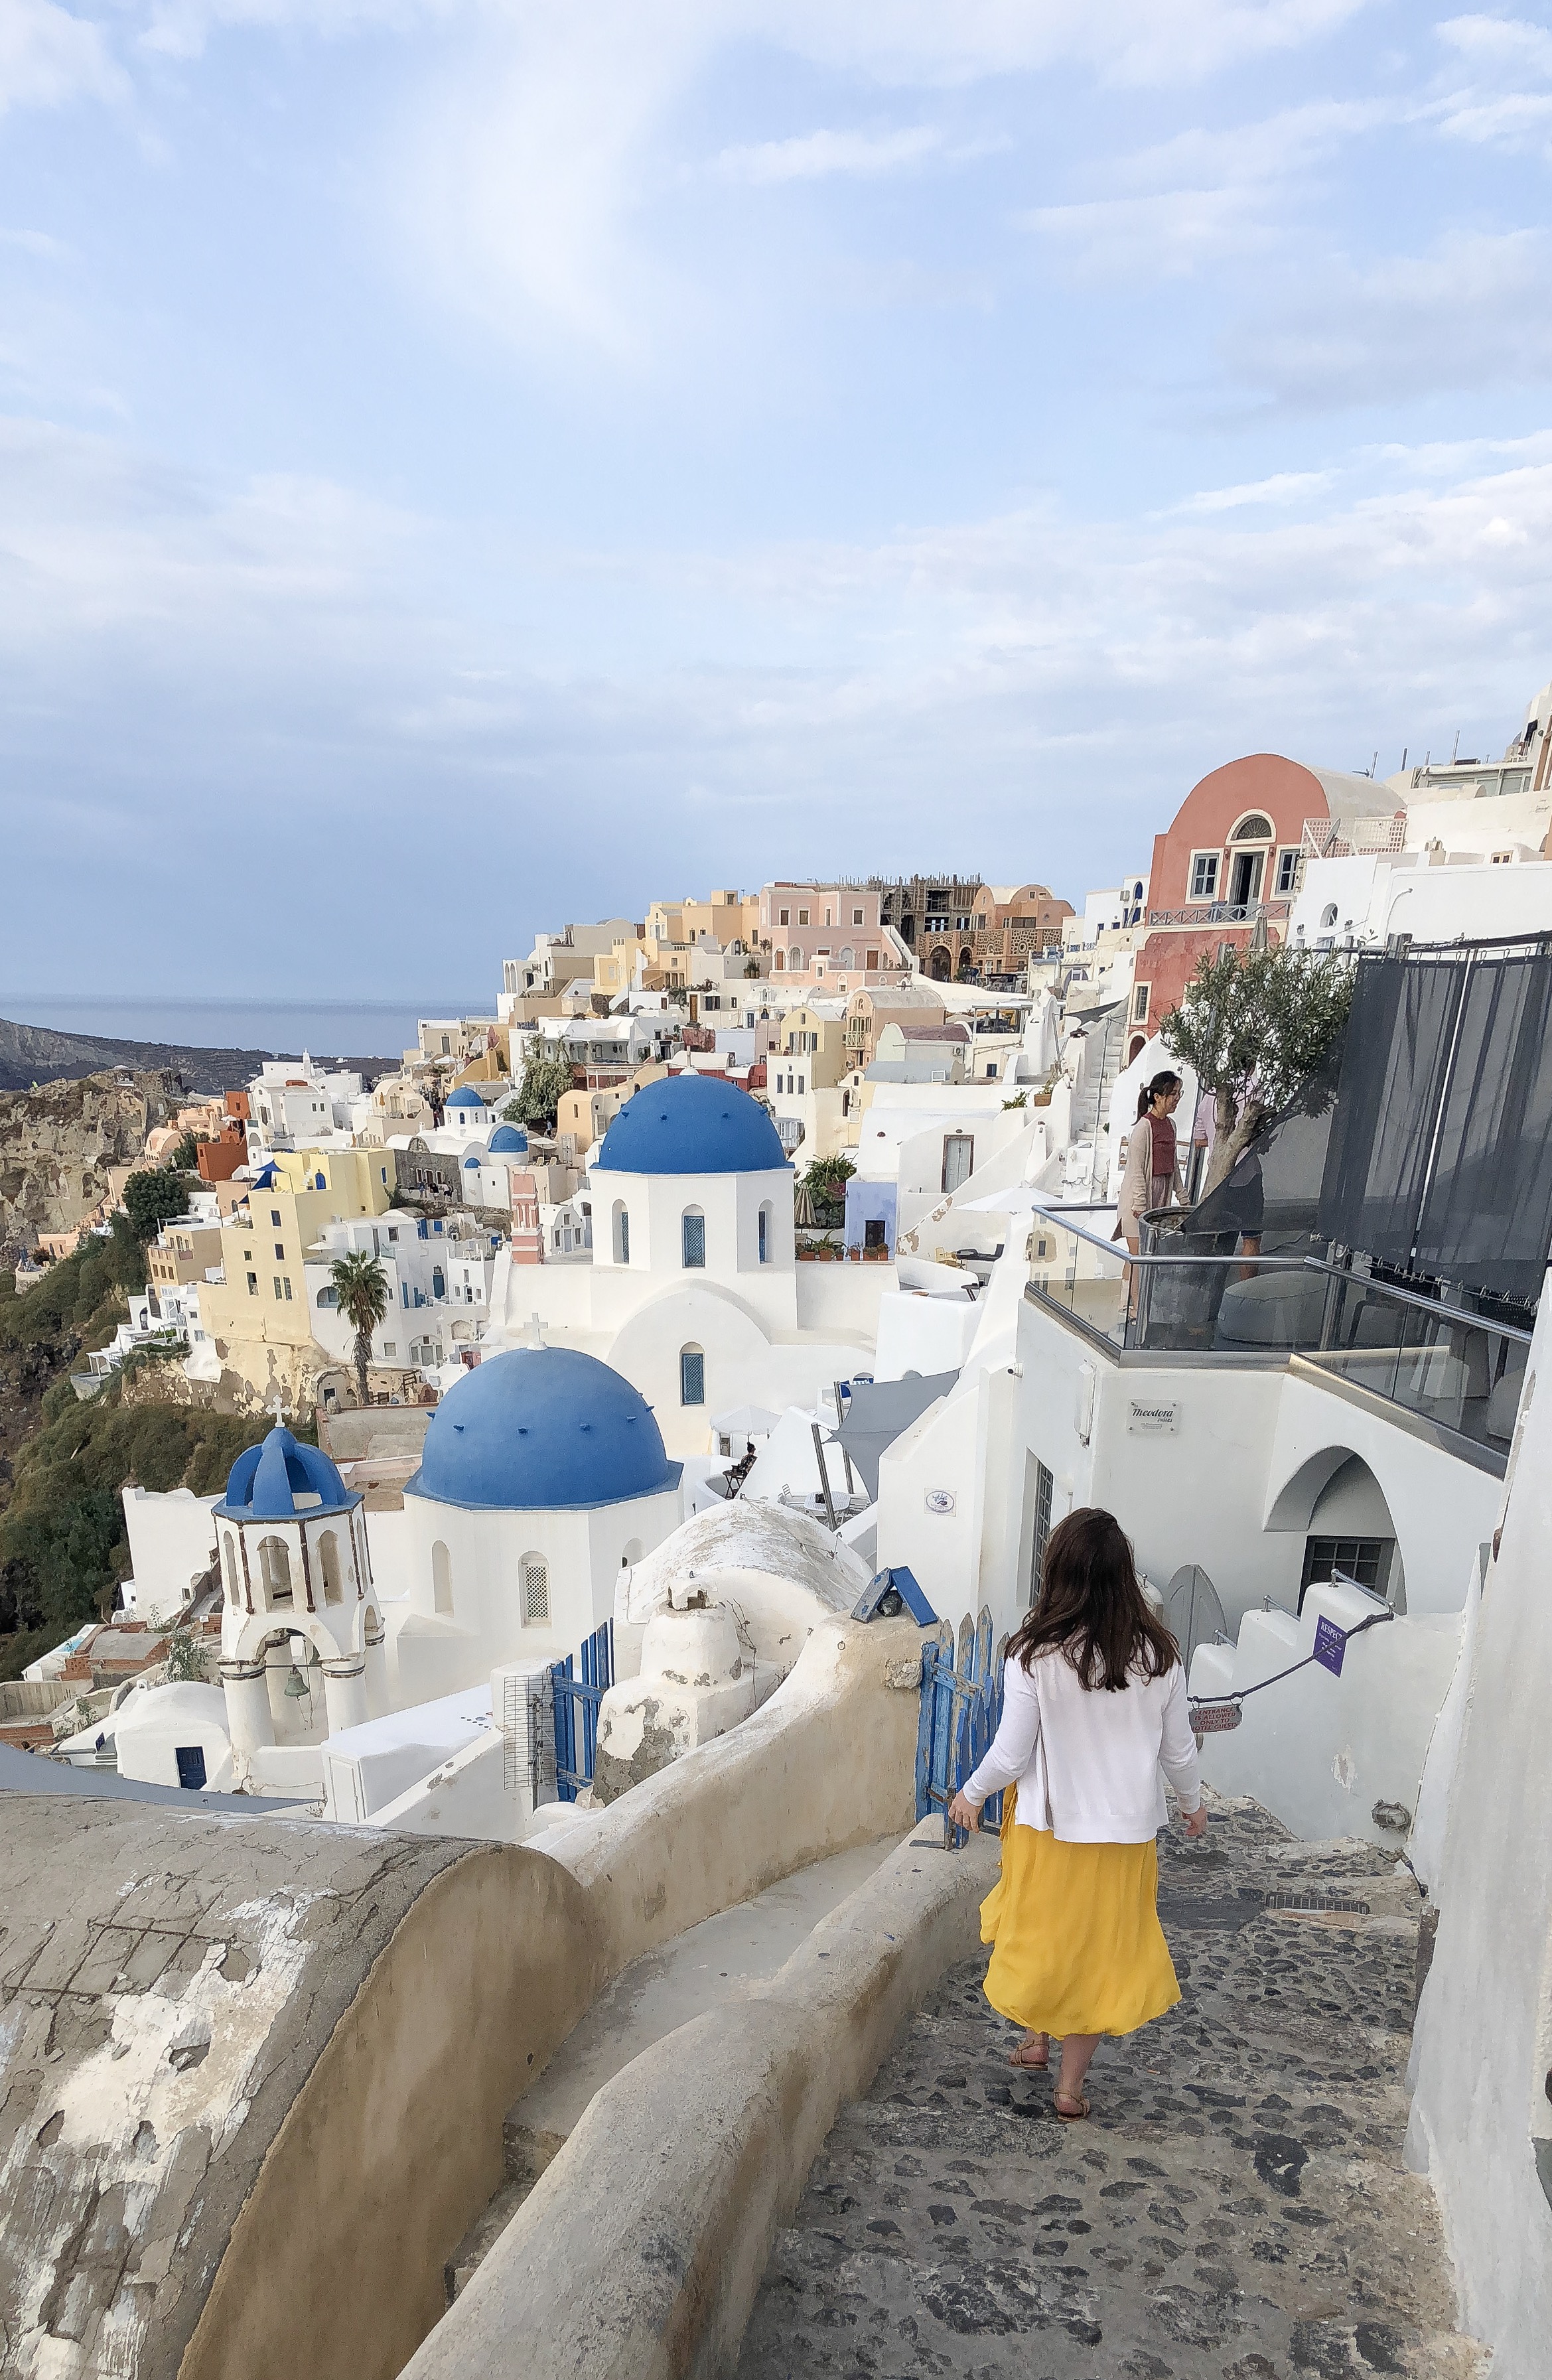 Capturing the Blue Domes in Oia, Santorini